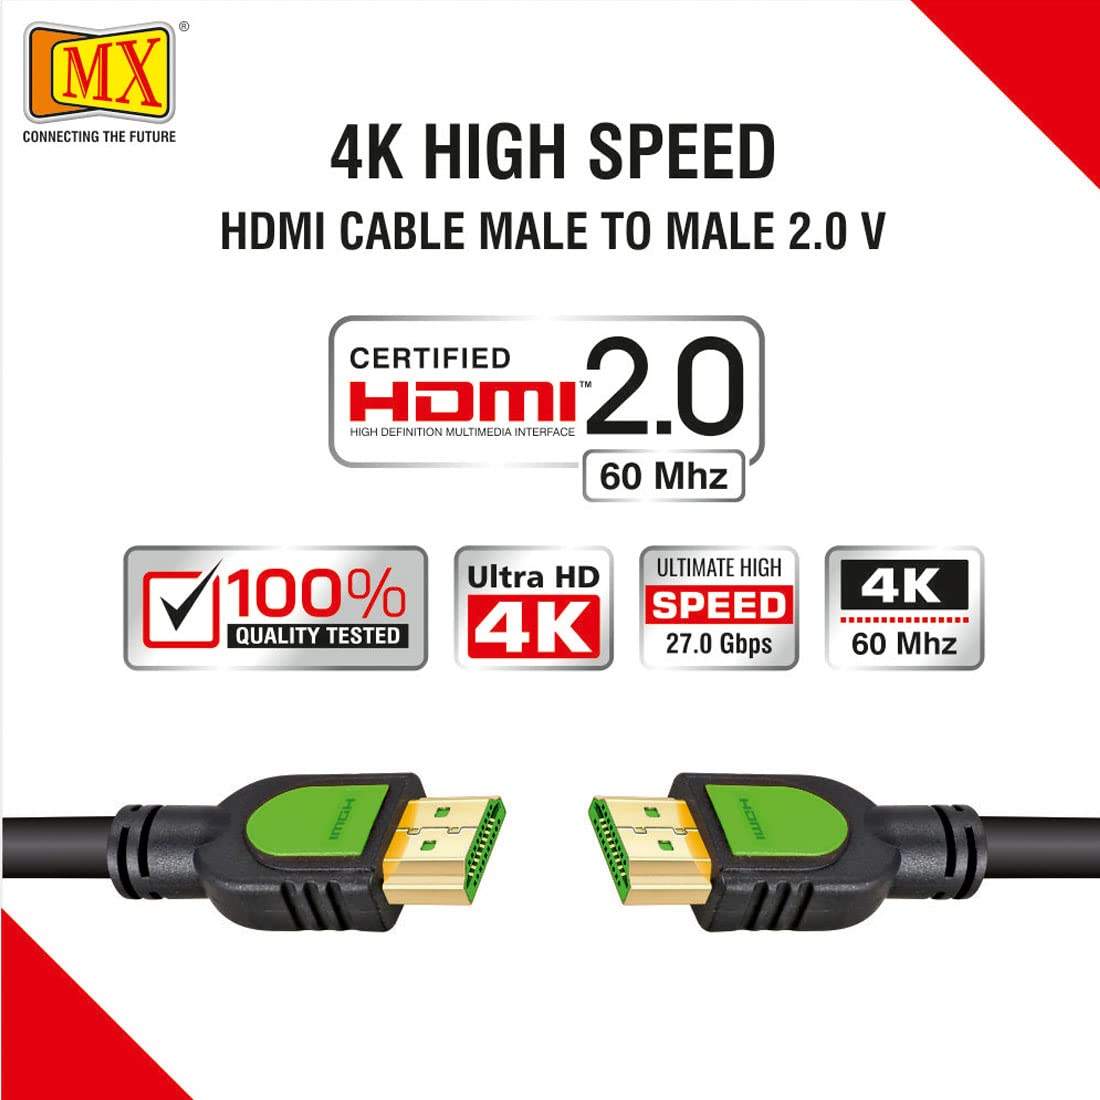 MX HDMI Male to HDMI Male Cord 2.0 V (10 Meter) 19pin High Speed HDMI Cable  Supports 4K@30MHz, 2160p, 1080p & 3D and Audio Return for TV, Laptop, PC,  Monitor & Projector (